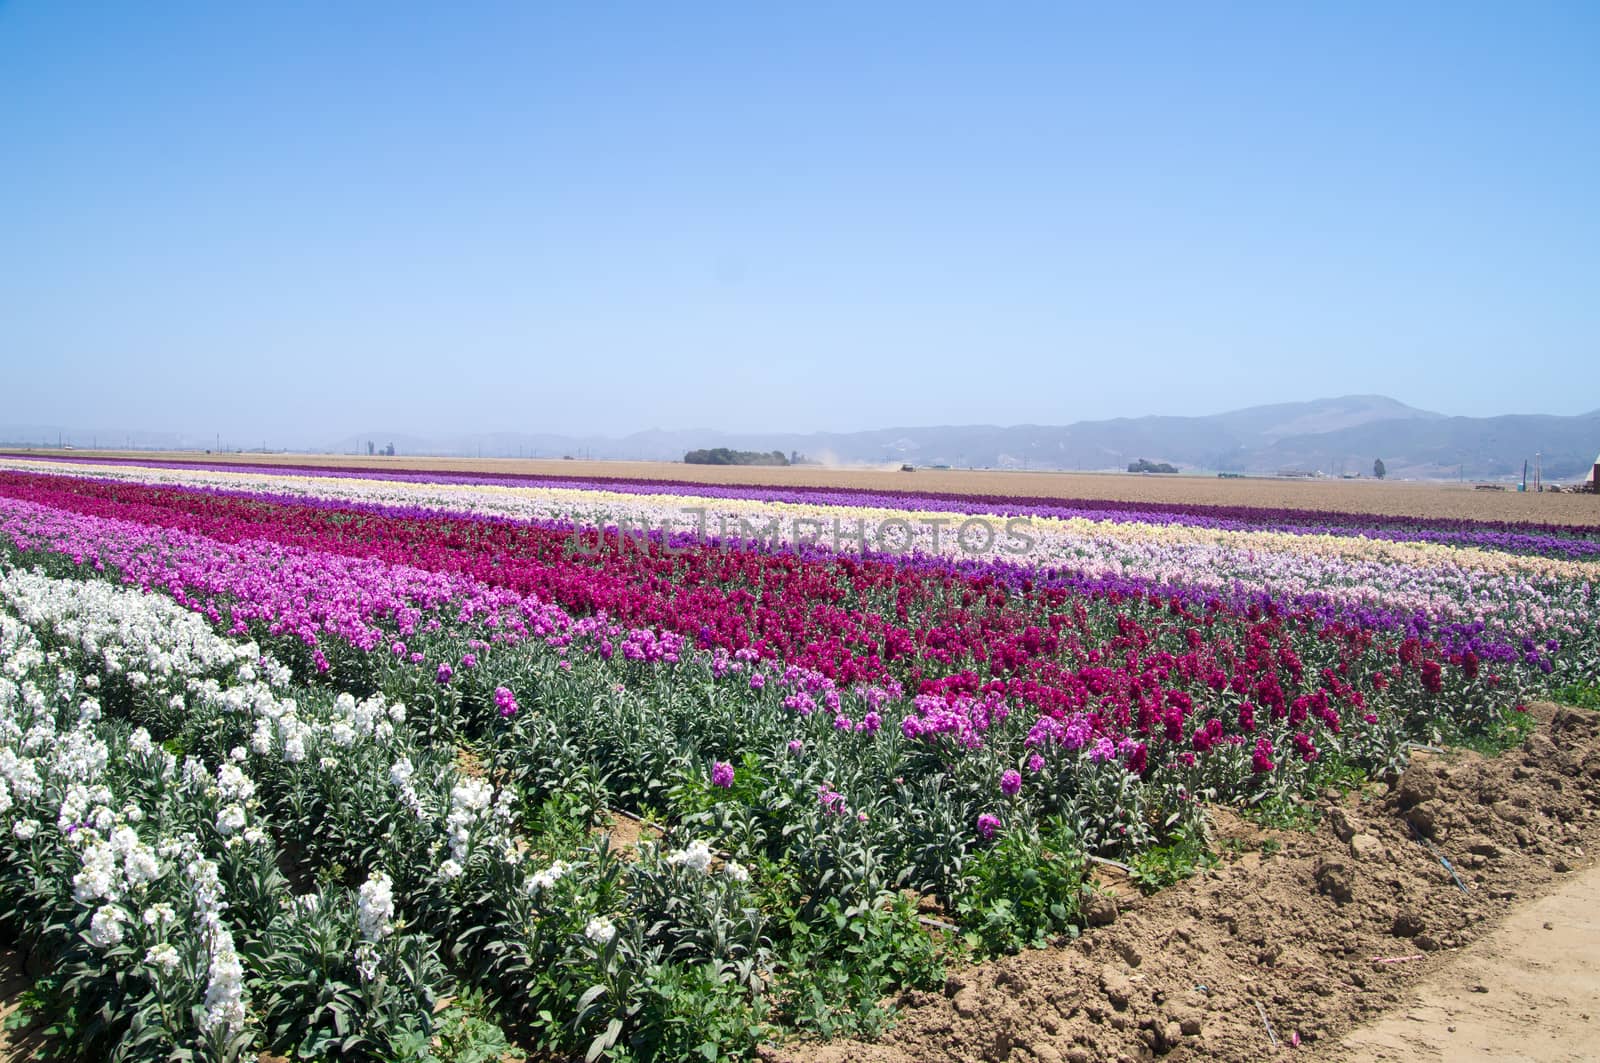 Rows of flowers growing in California by emattil